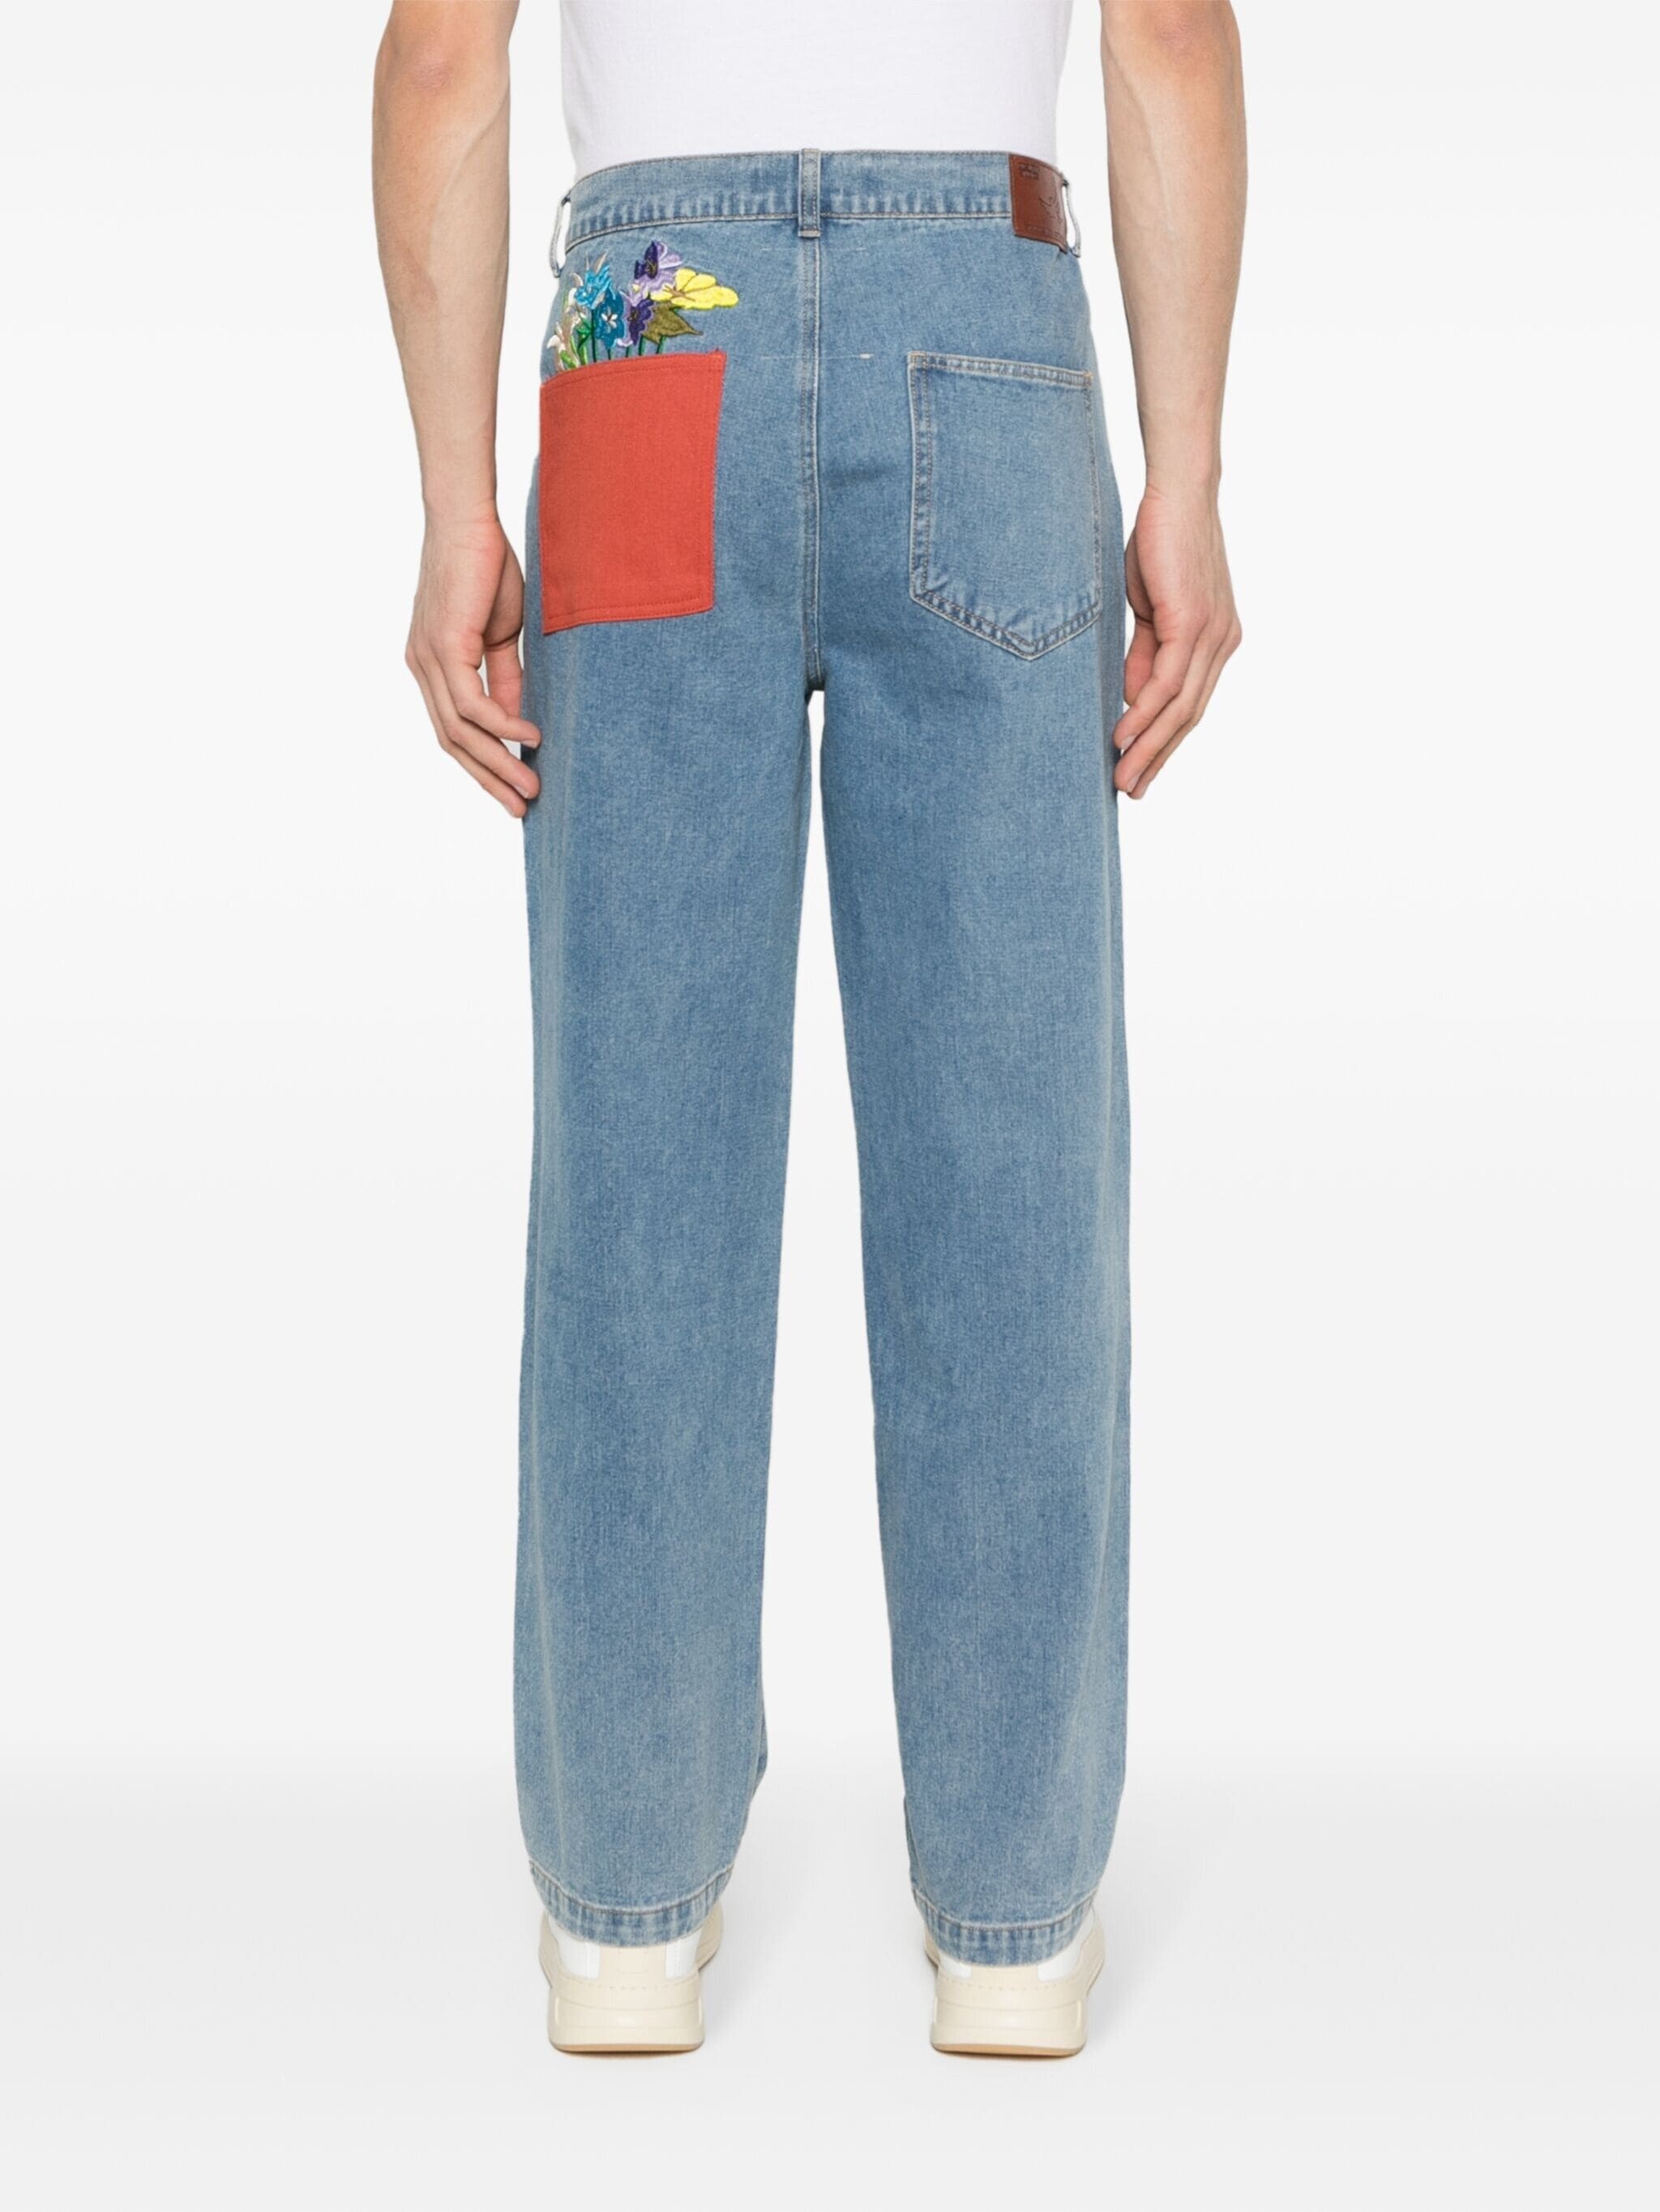 flower-pots embroidered tapered jeans - 4